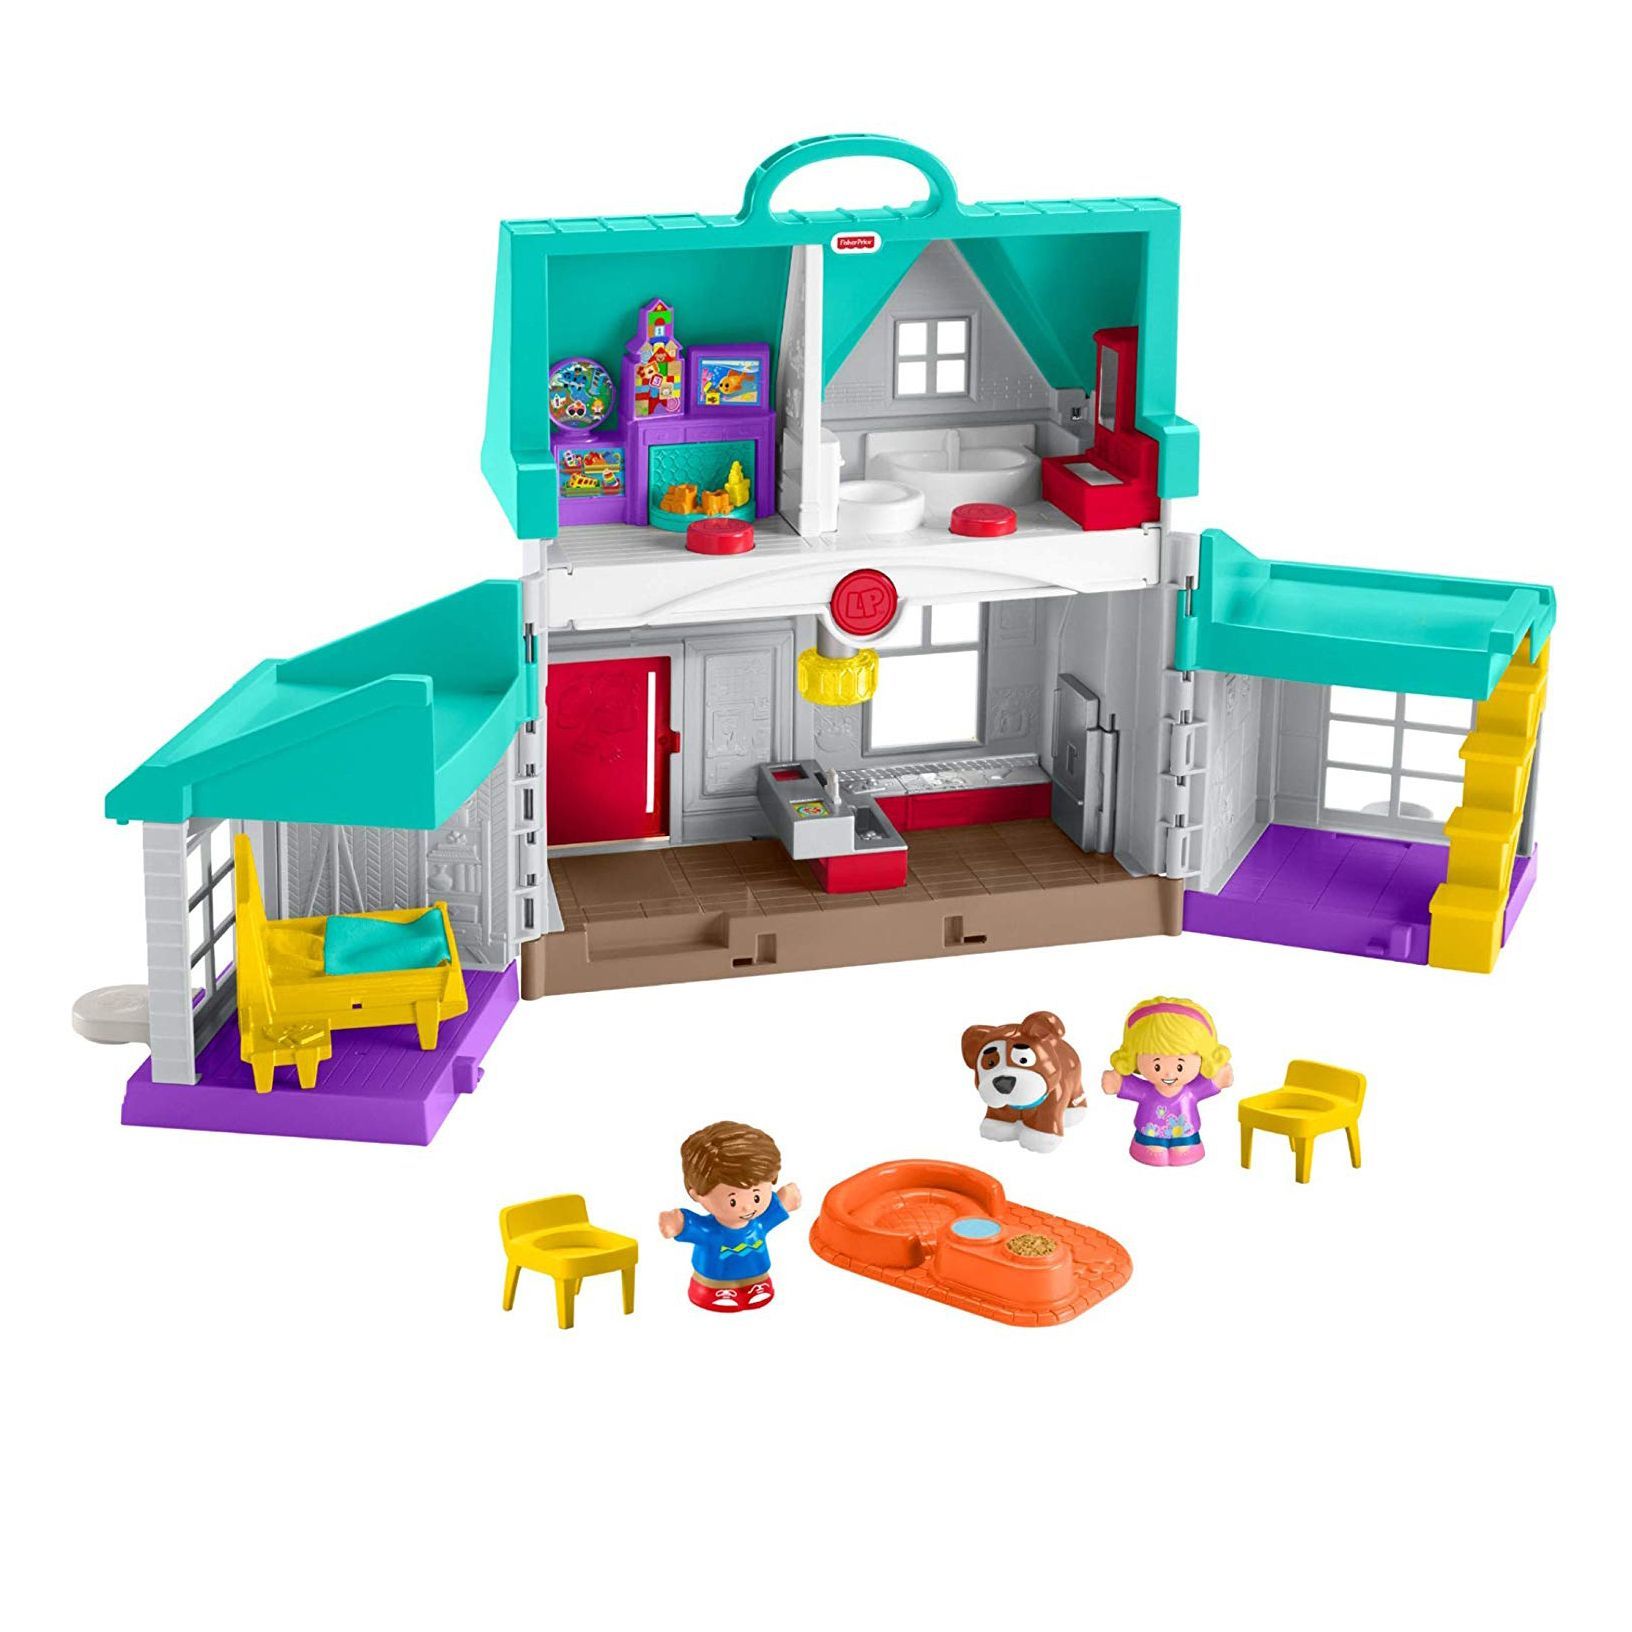 2019 toys for toddlers